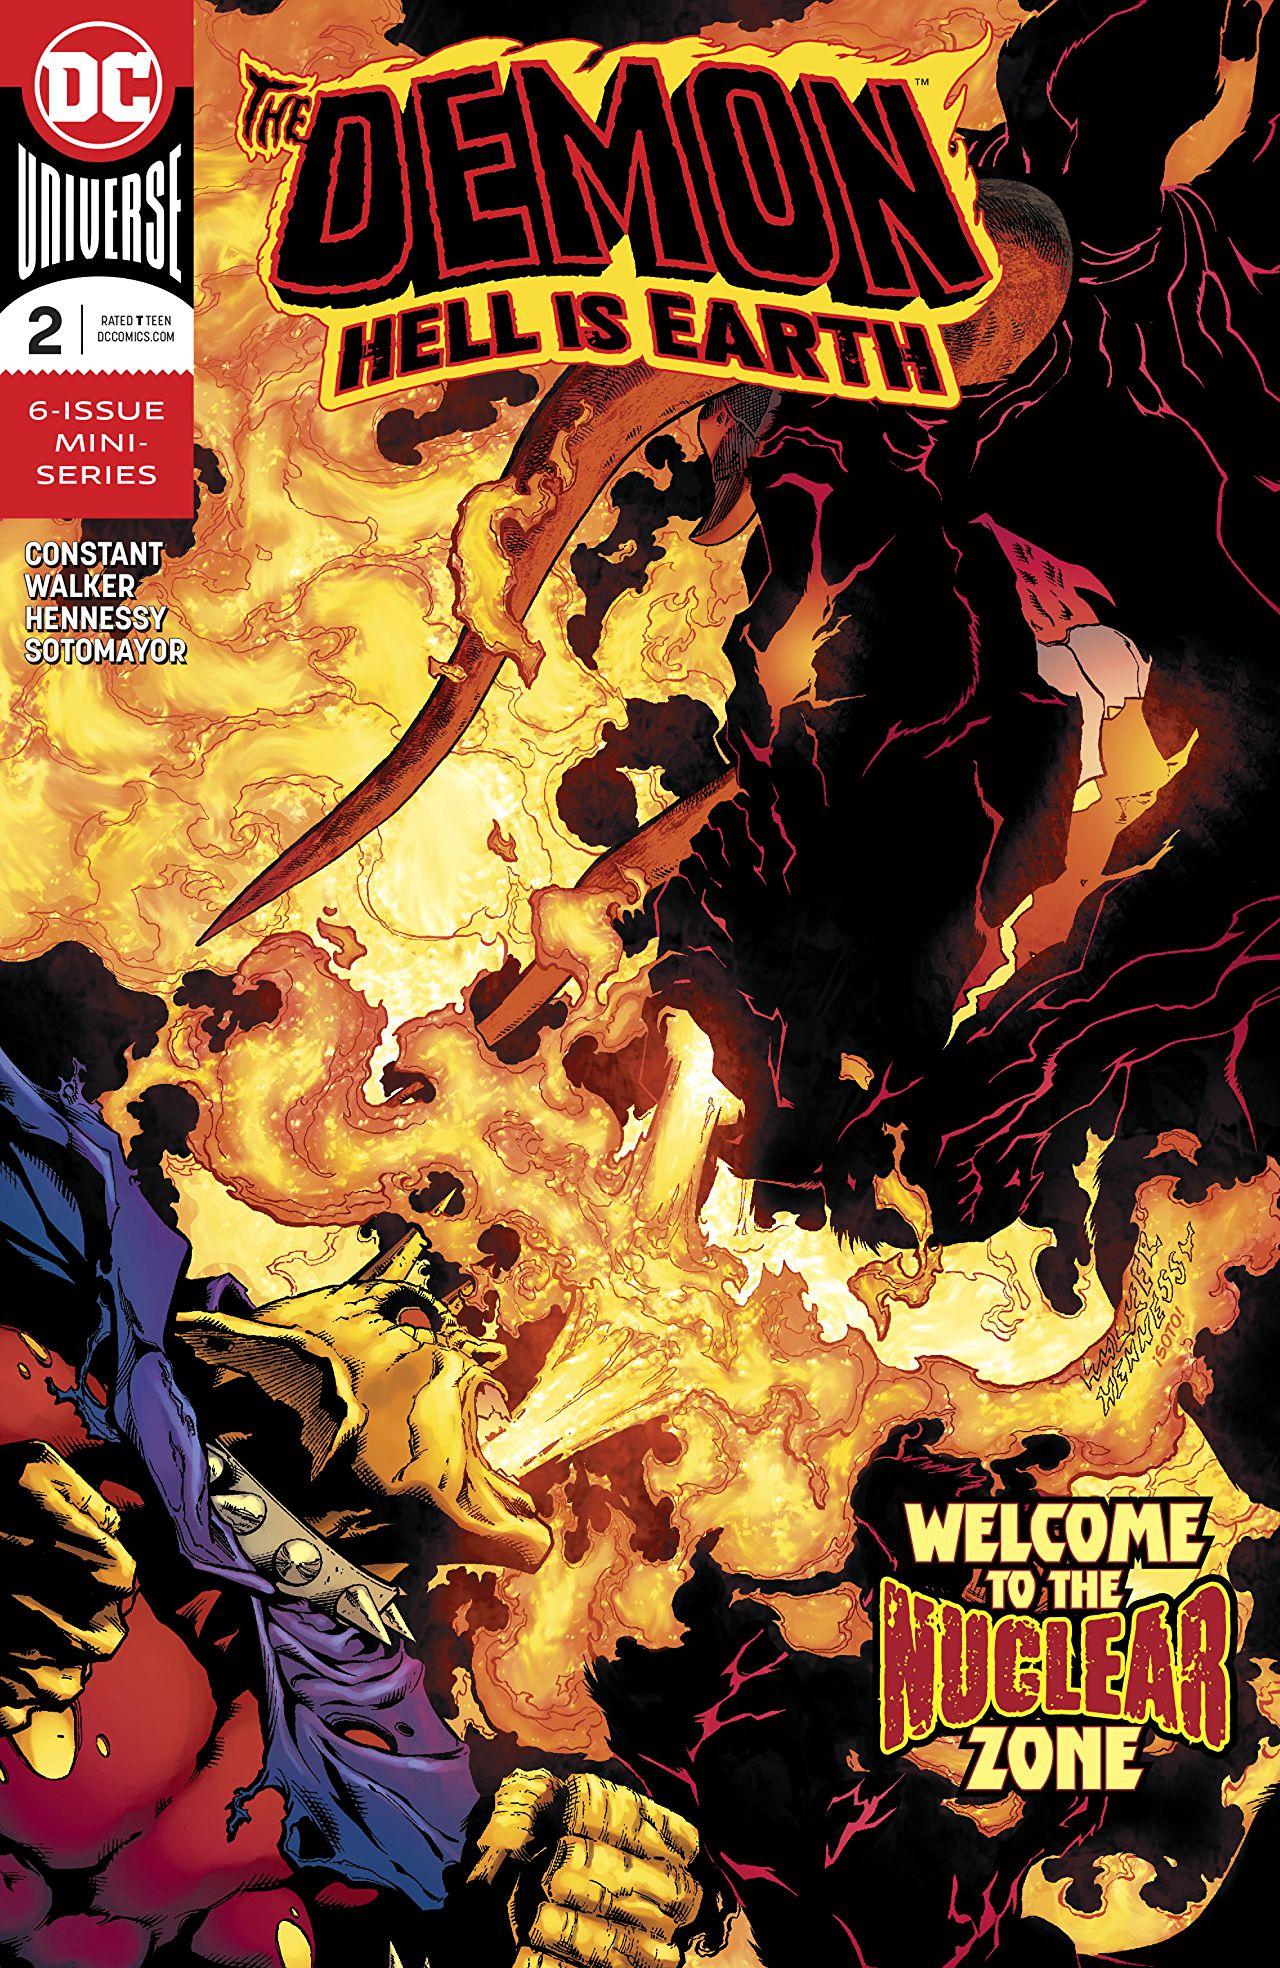 The Demon: Hell Is Earth Vol. 1 #2